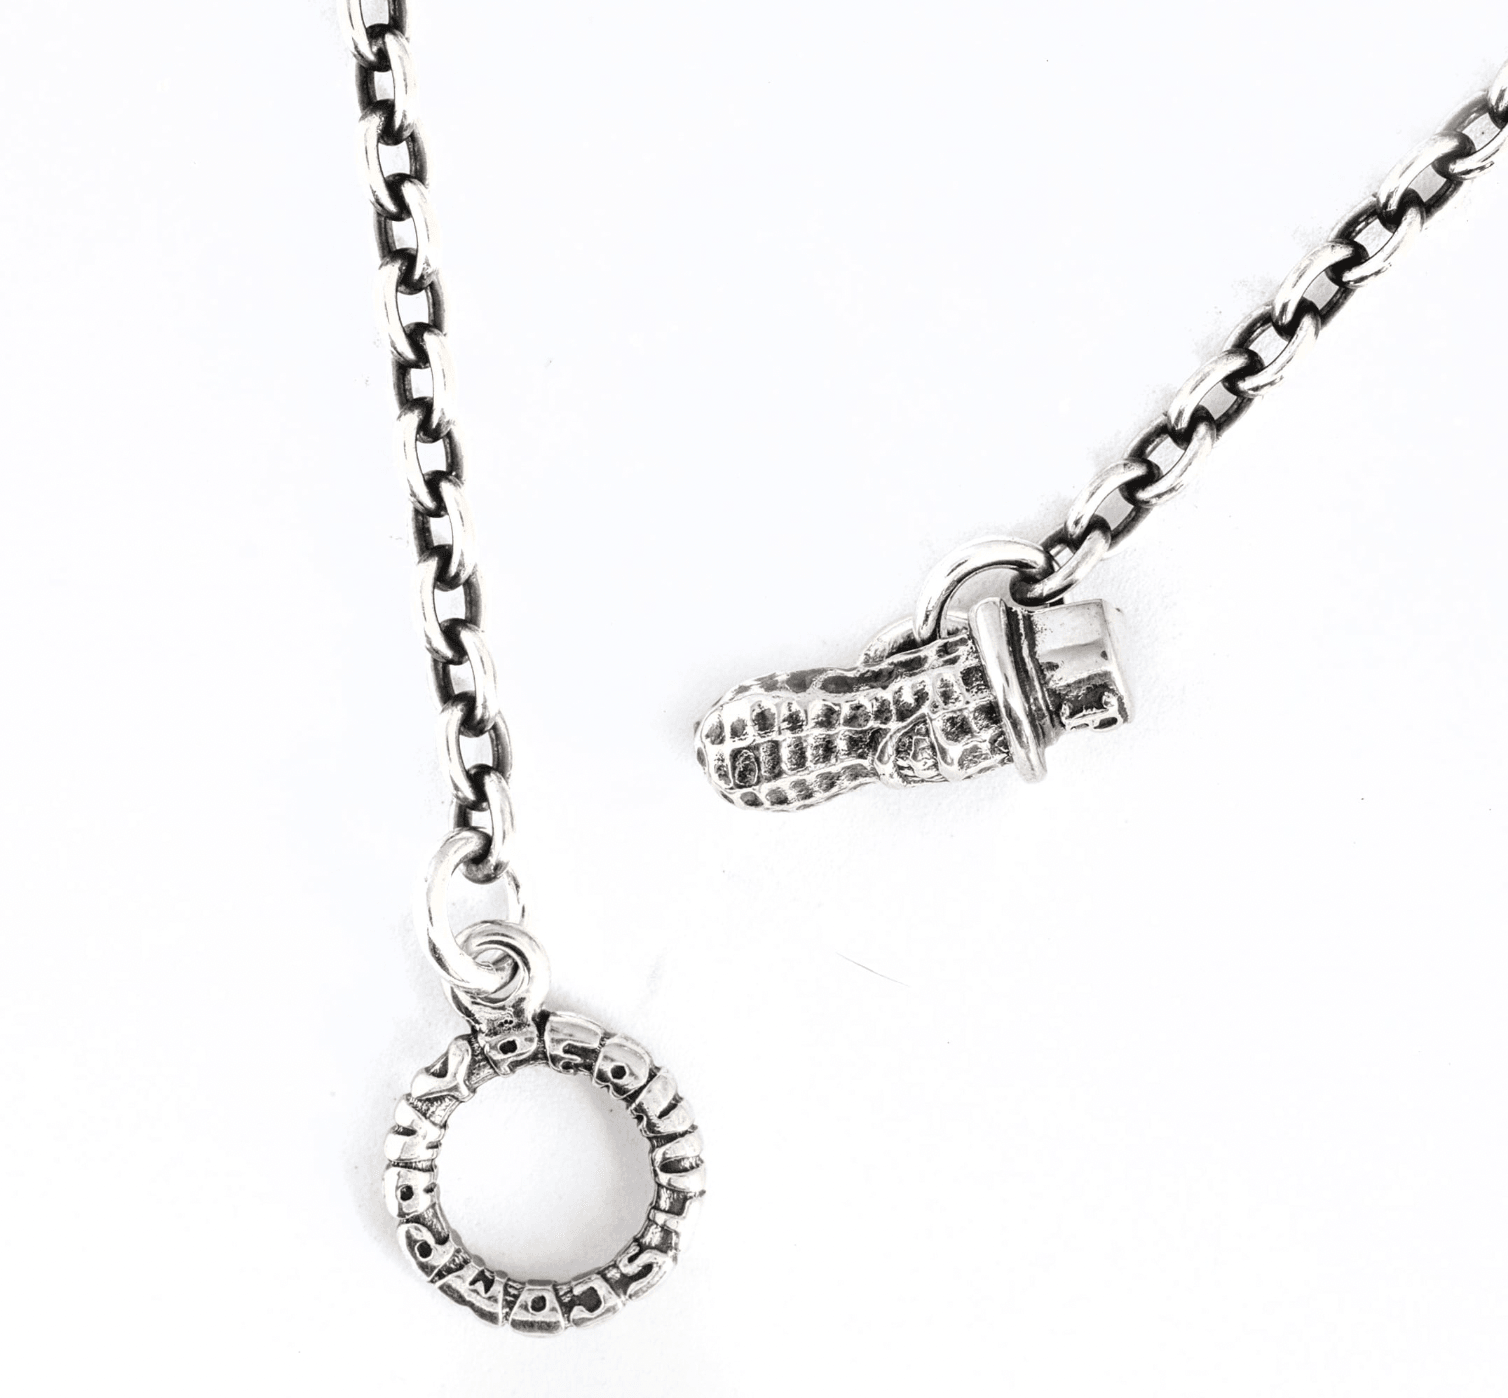 Image showing the Peanuts & Co MEDIUM PEANUTS Pendant with silver chain - Silver which is a Jewellery described by the following info Accessories, Jewellery, Peanuts & Co, Released and sold on the IRON HEART GERMANY online store